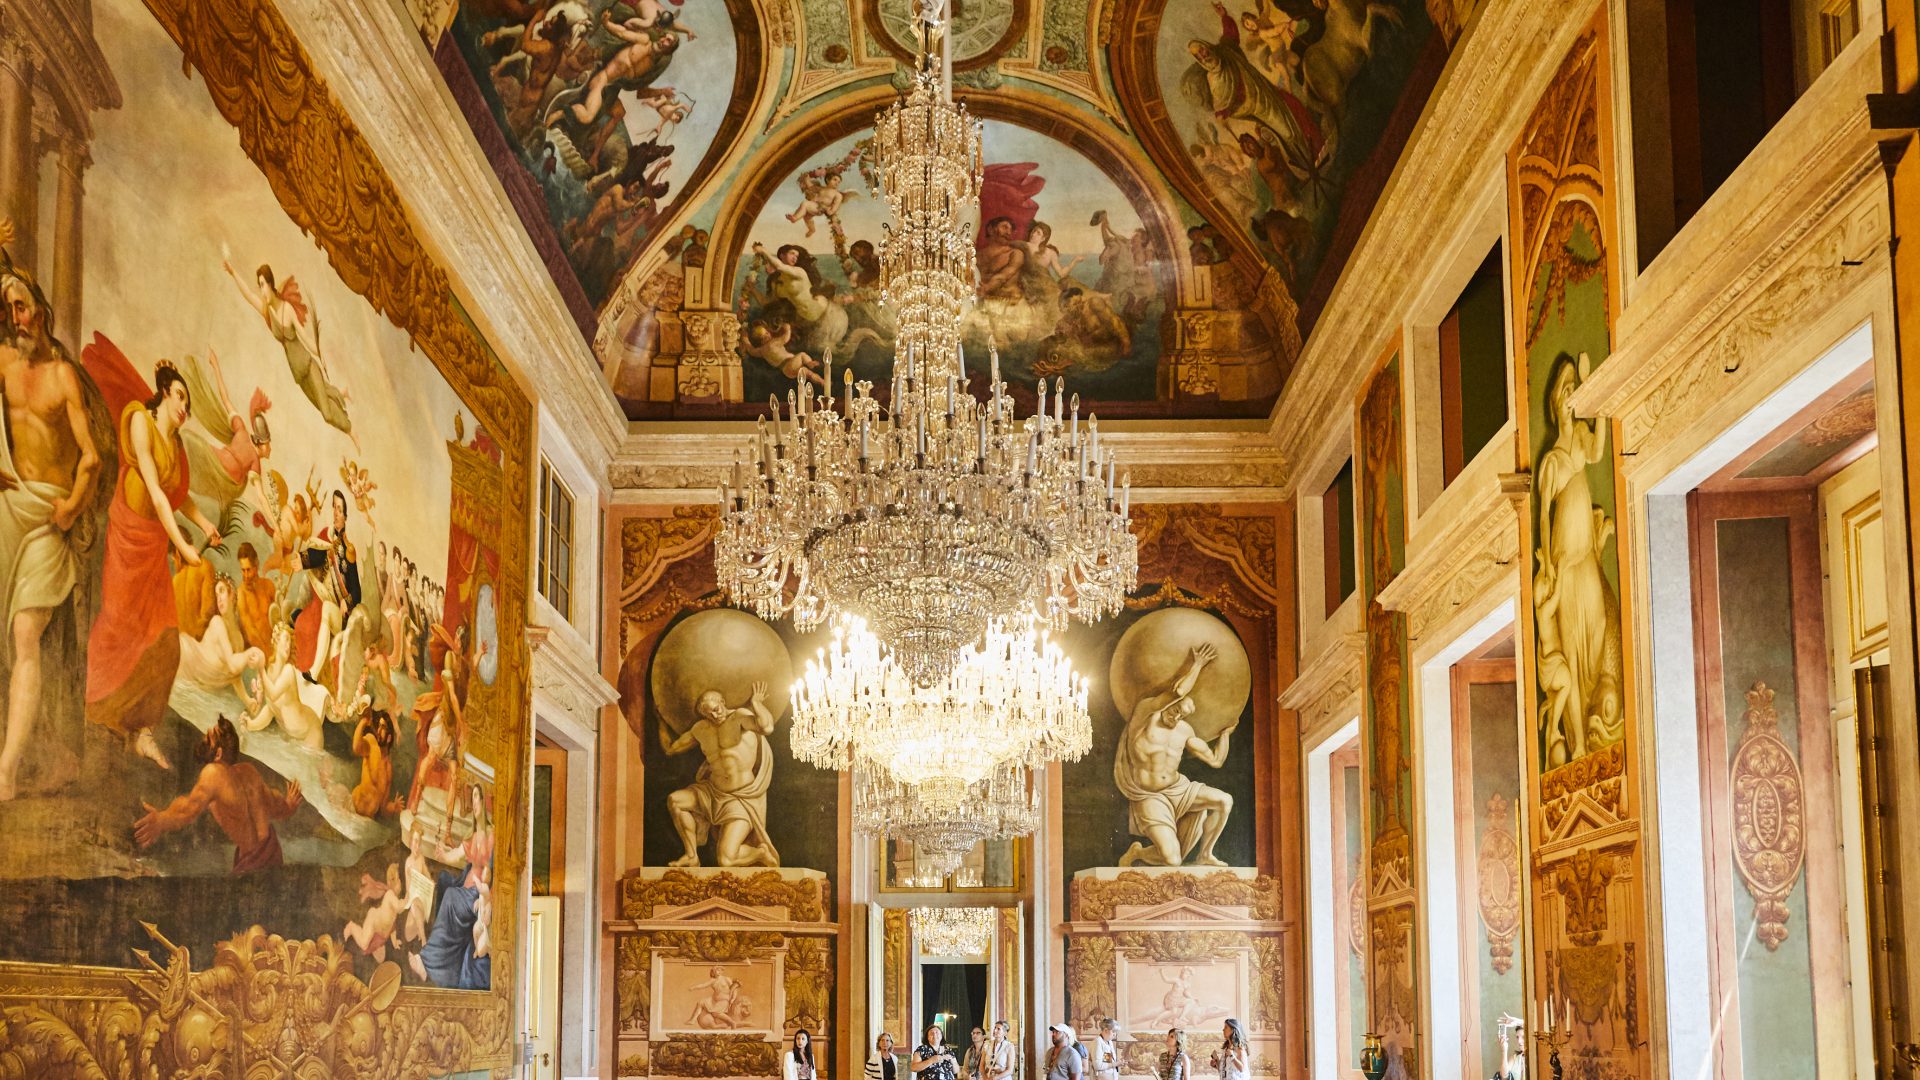 Lisbon, Portugal - palace interior with chandeliers and fresks